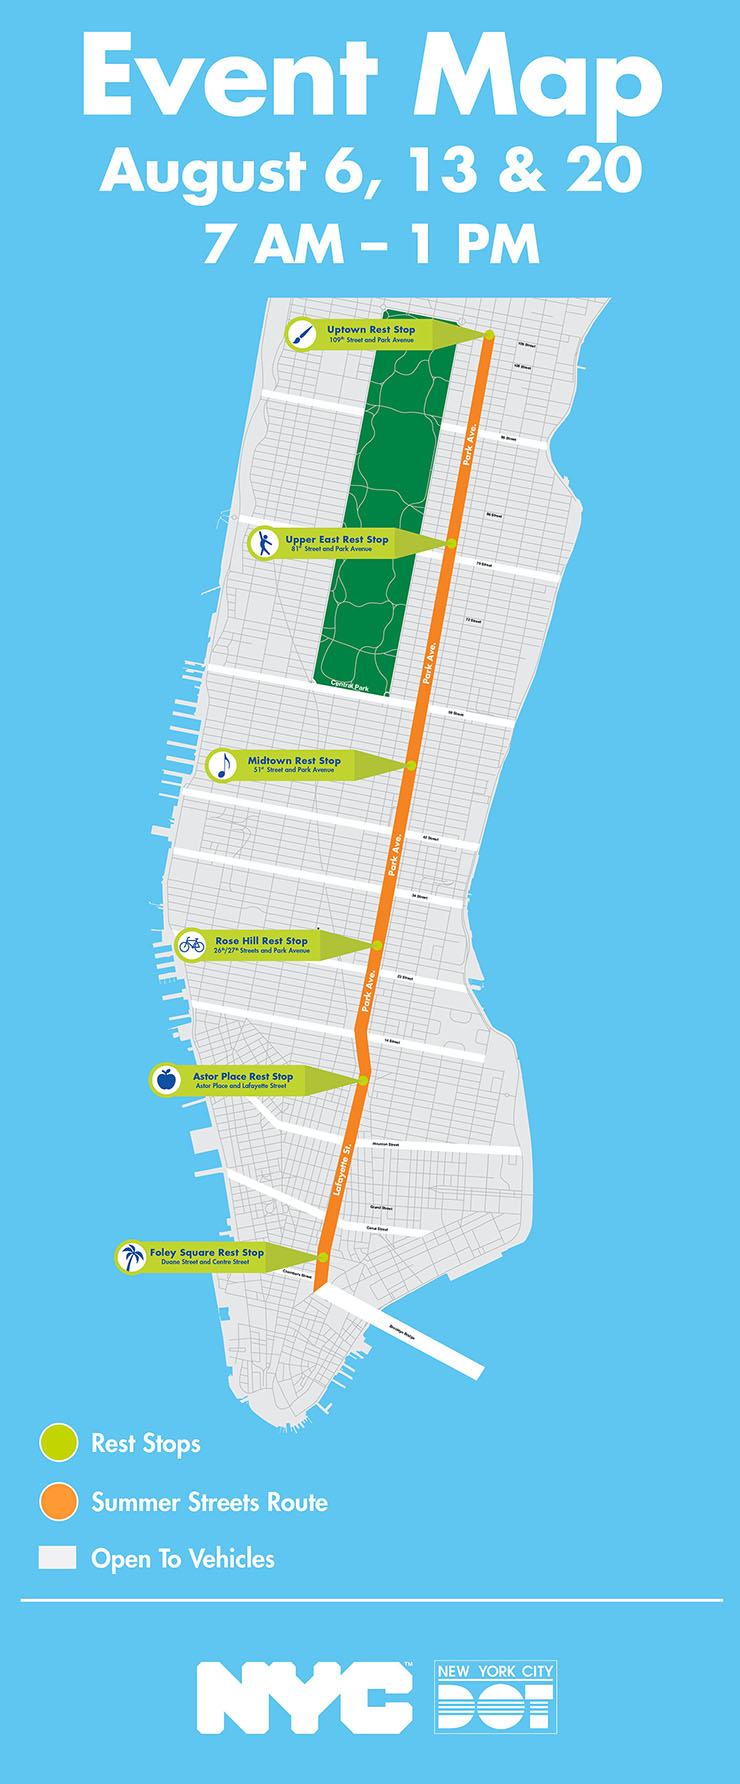 A map of Manhattan highlighting the Summer Streets event route along Lafayette Street and Park Avenue from Brooklyn Bridge to Central Park. Six rest stops are highlighted: Uptown Rest Stop at 109th Street and Park Avenue, Upper East Rest Stop at 81st Street and Park Avenue, Midtown Rest Stop at 51st Street and Park Avenue, Rose Hill Rest Stop at 26th/27th Streets and Park Avenue, Astor Place Rest Stop at Astor Place and Lafayette Street, and Foley Square Rest Stop at Duane Street and Center Street. August 6, 13 and 20 from 7am to 1pm.